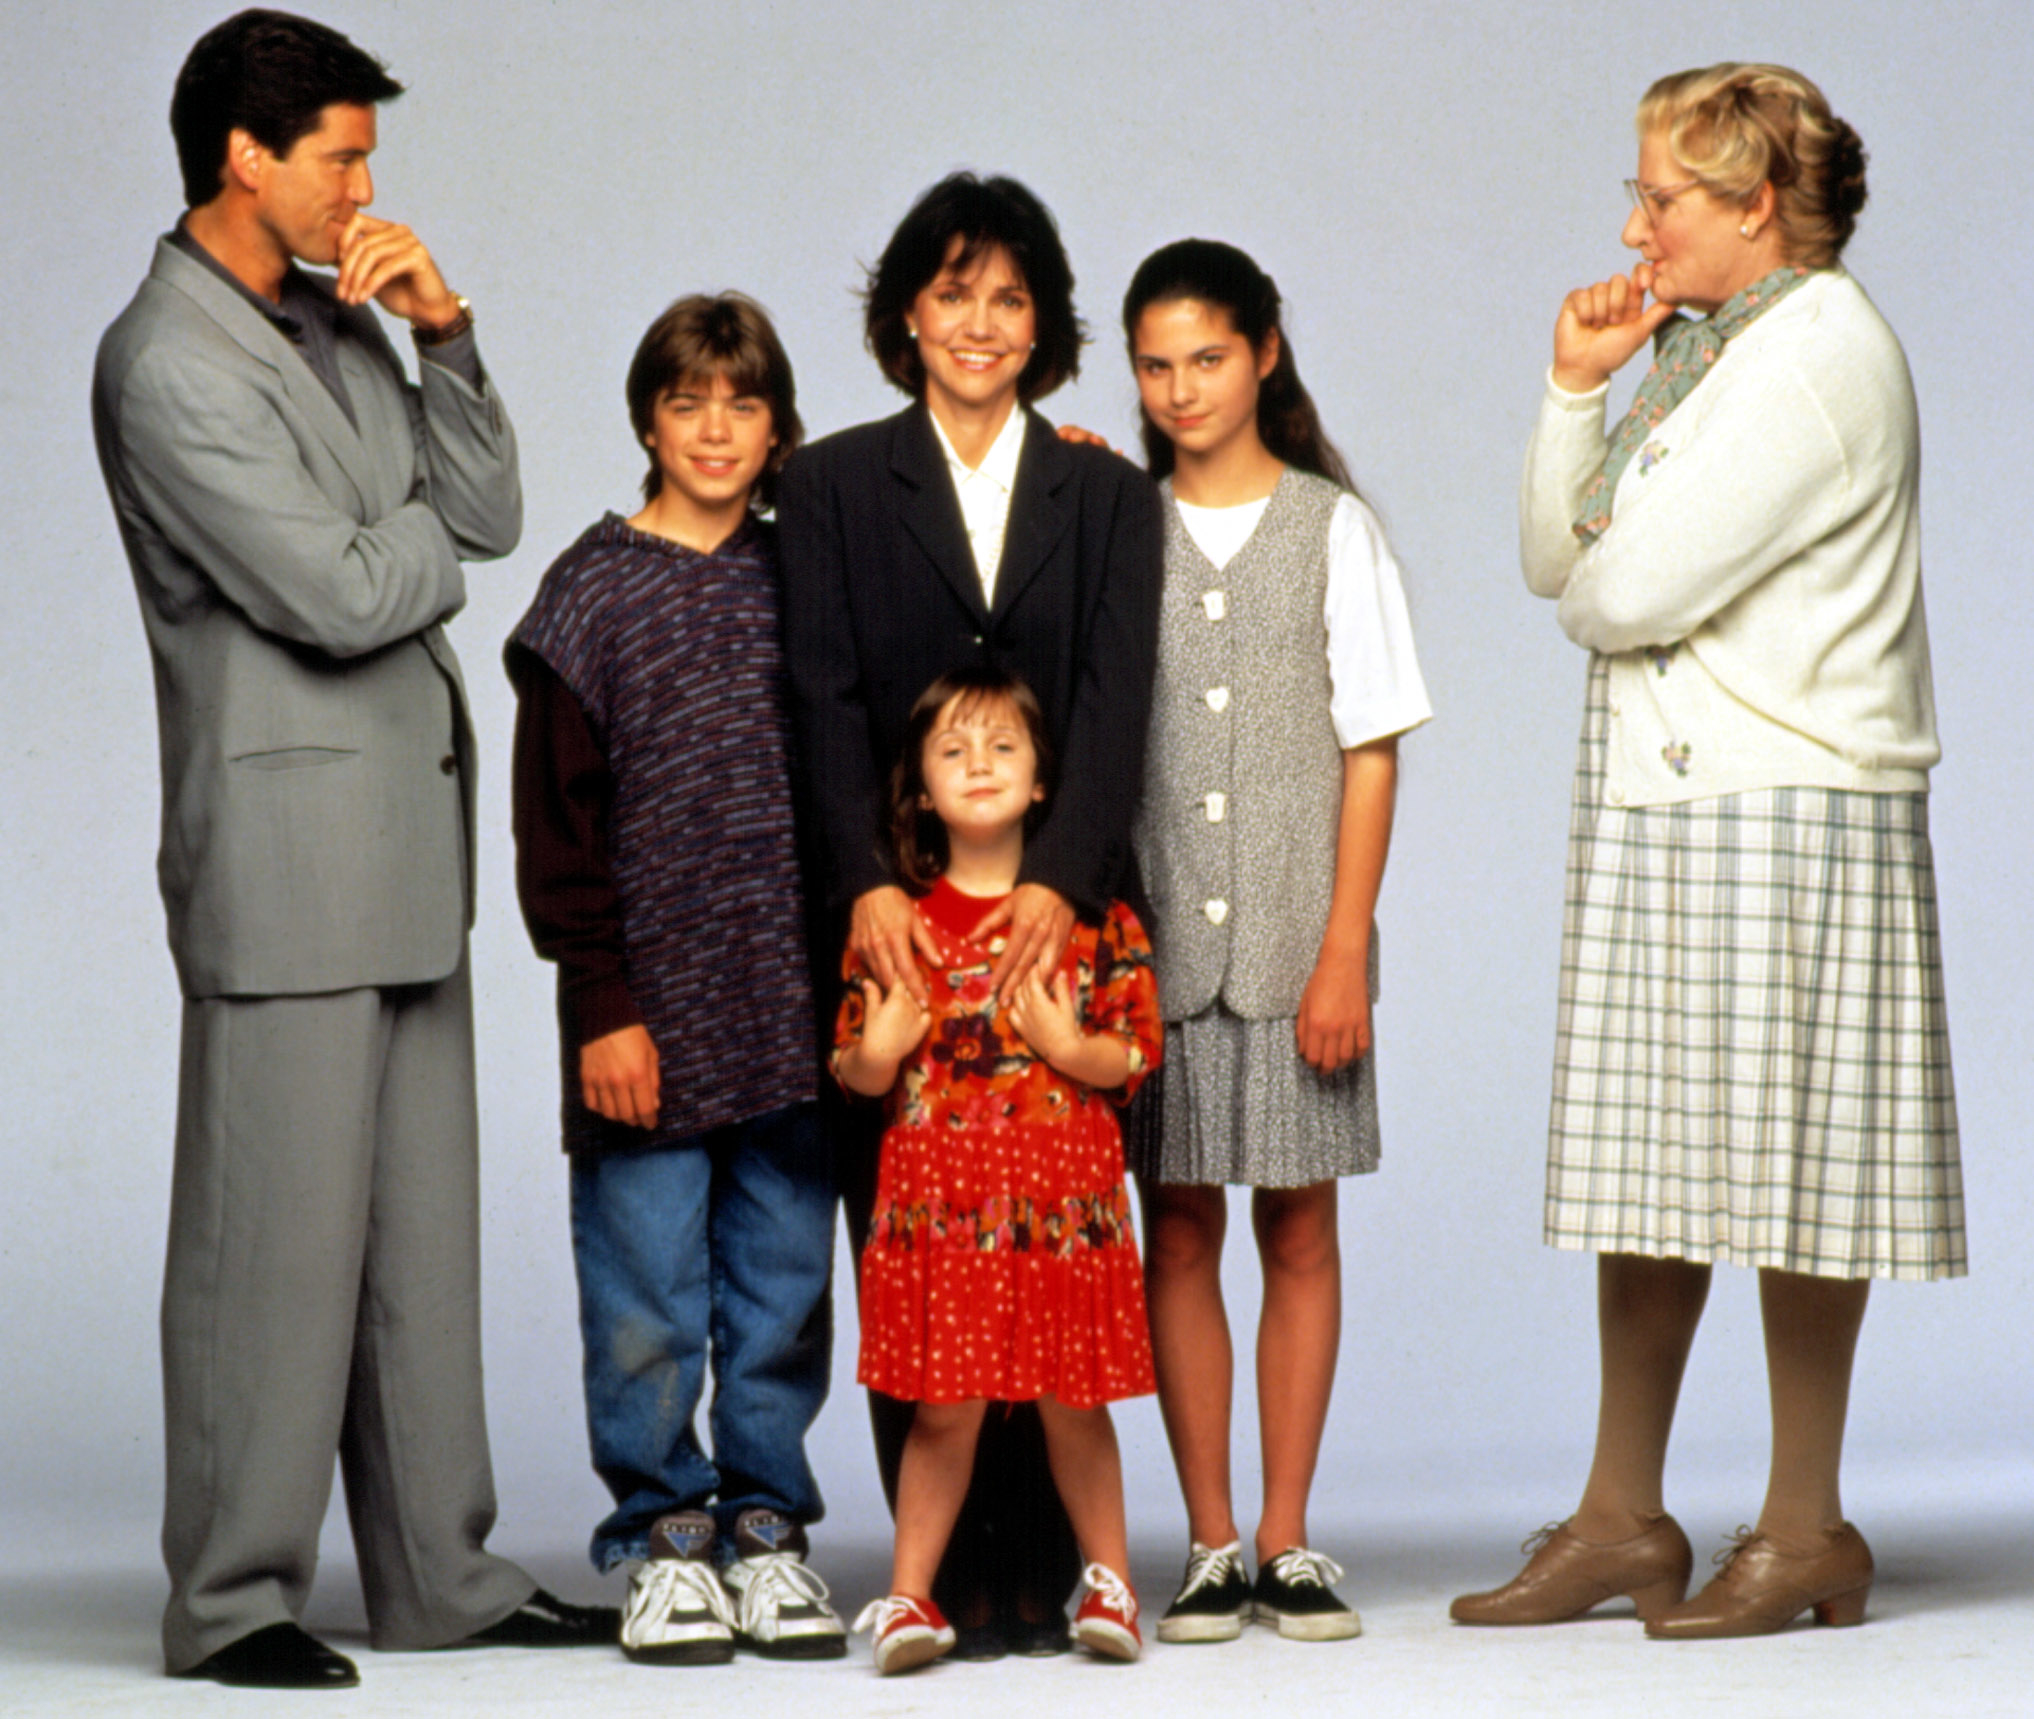 Promotional image from &quot;Mrs. Doubtfire&quot;